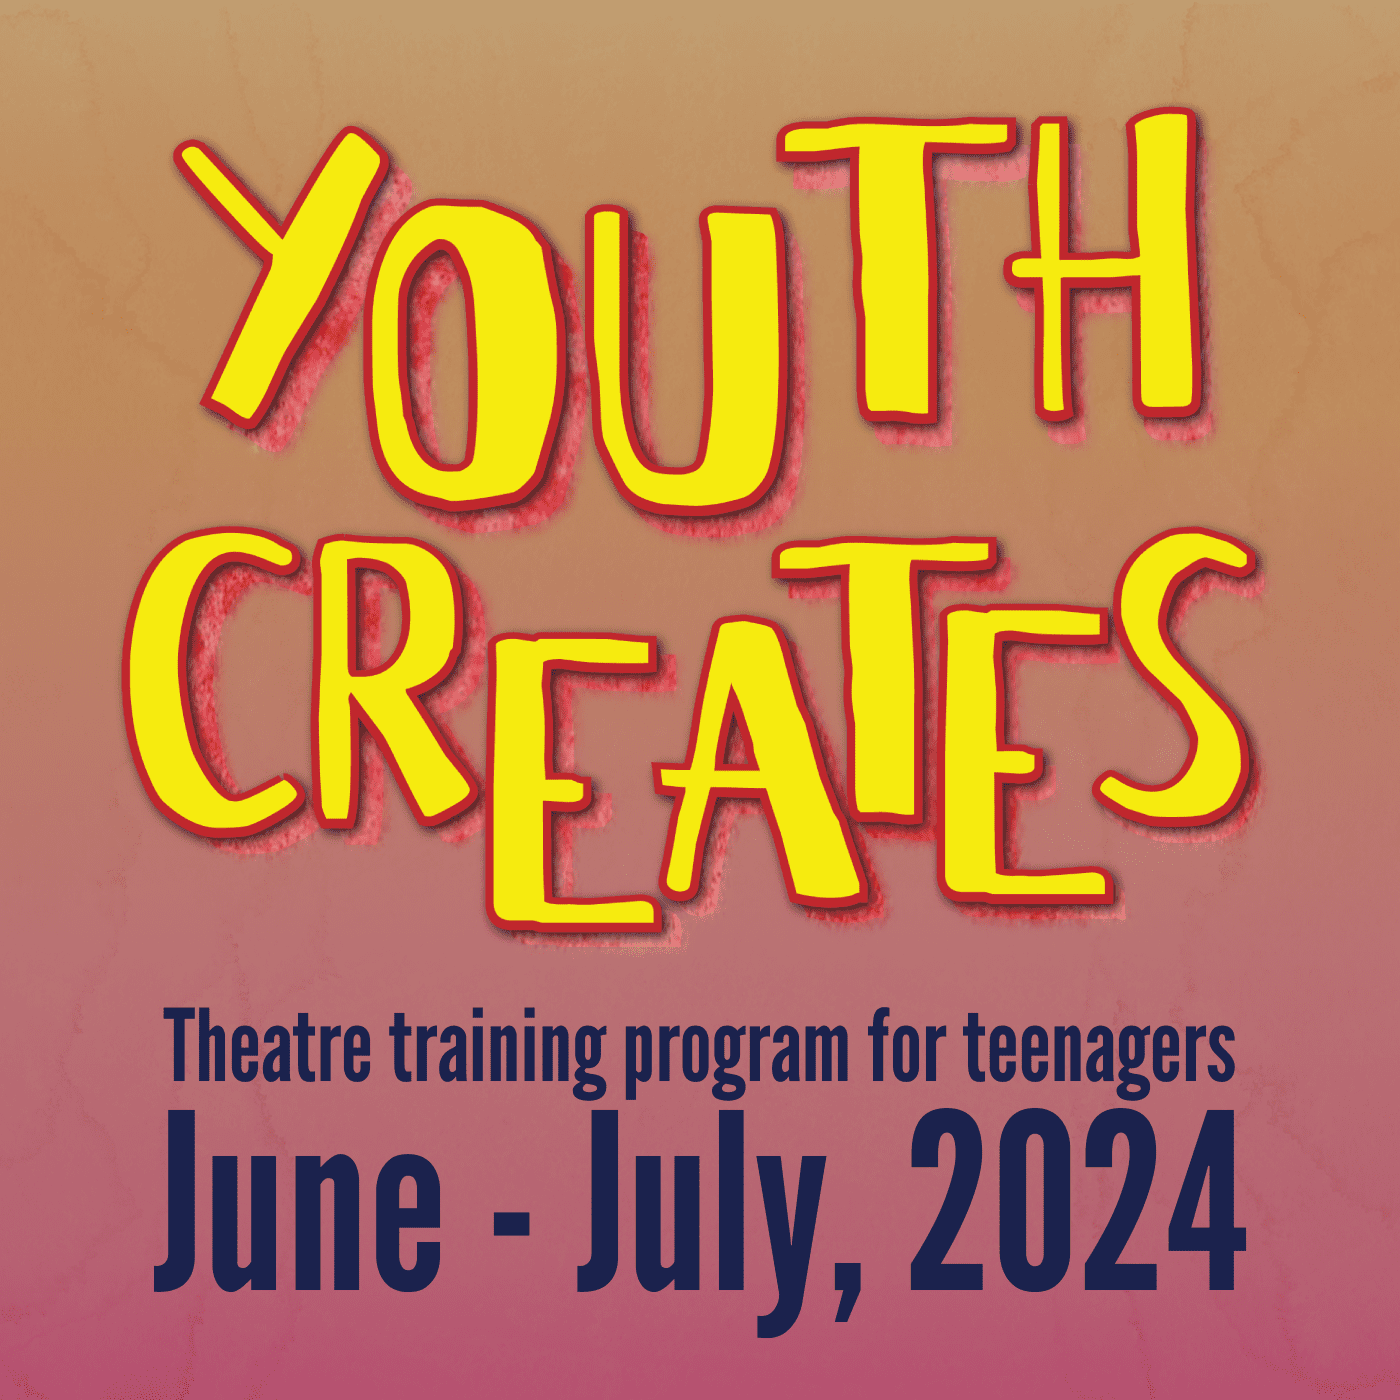 Youth Creates Theatre training program for teenagers. June-July, 2024